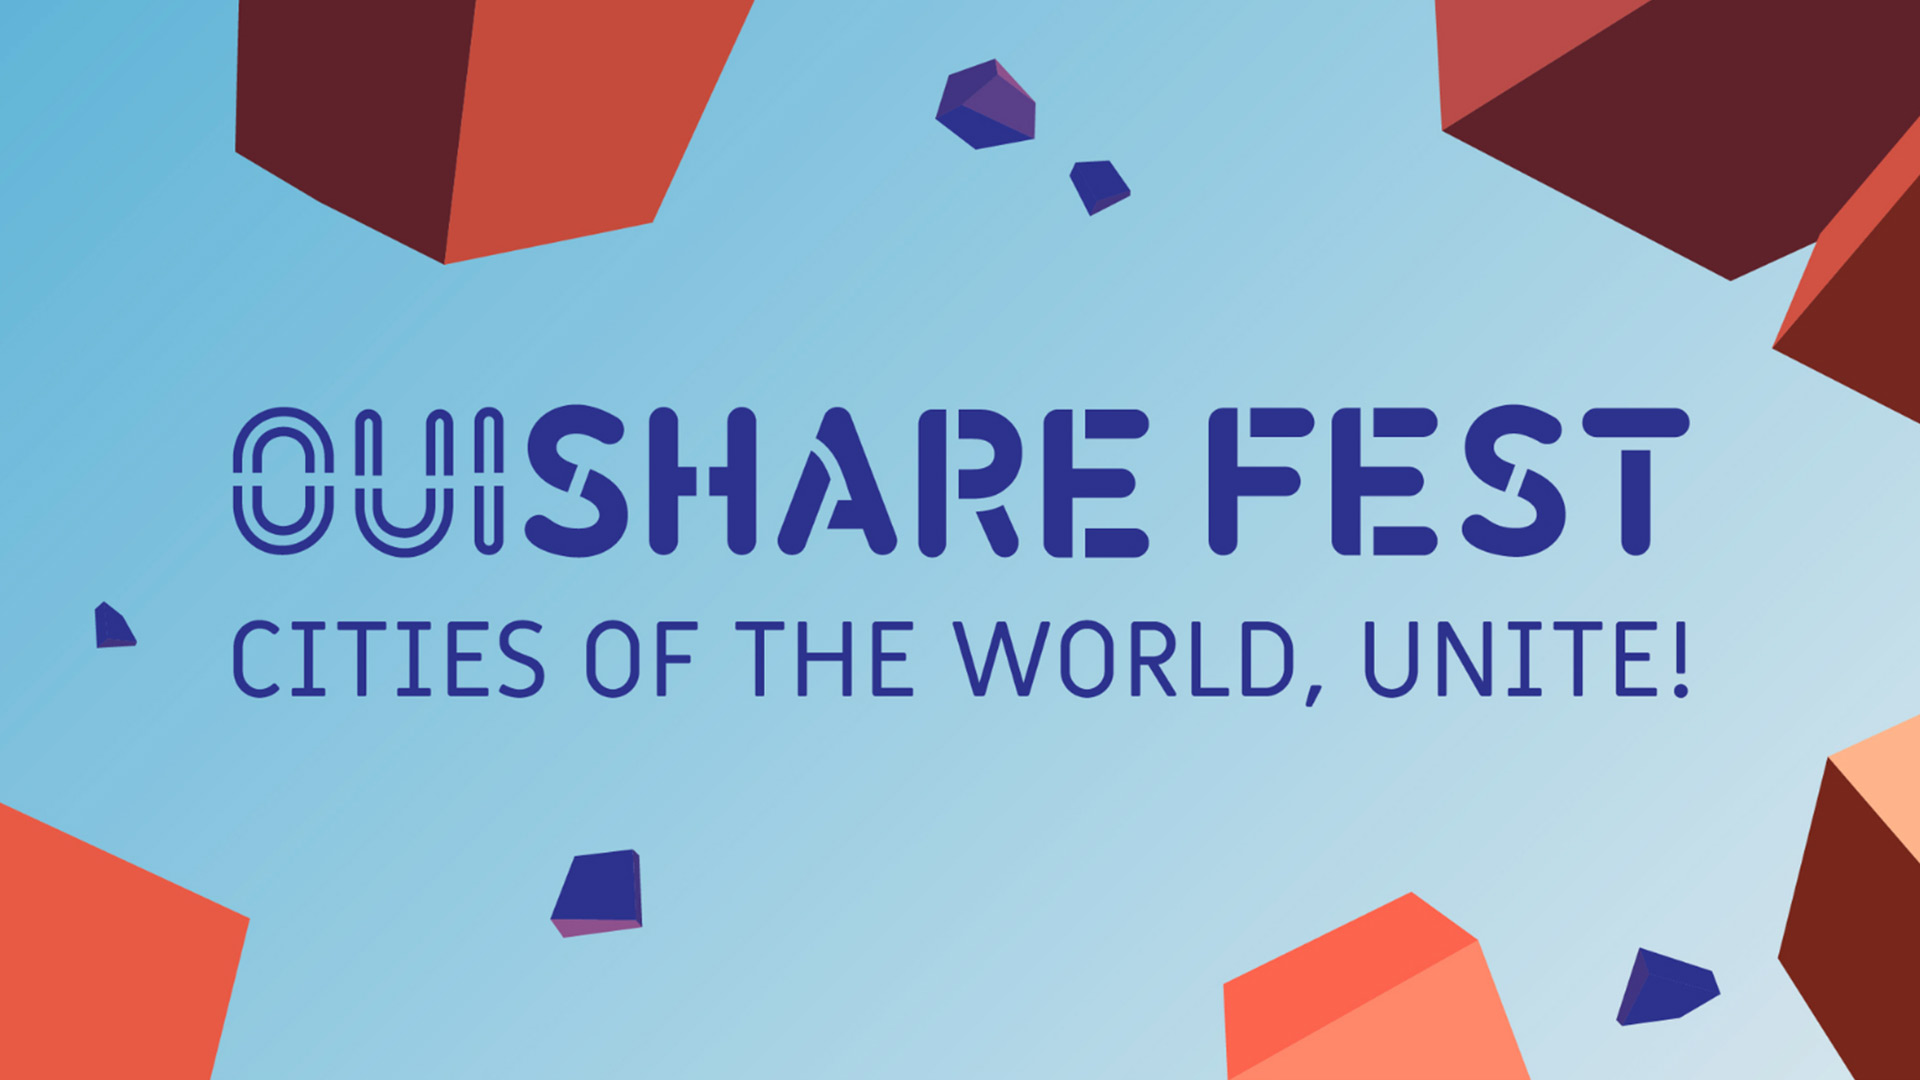 OuiShare Fest